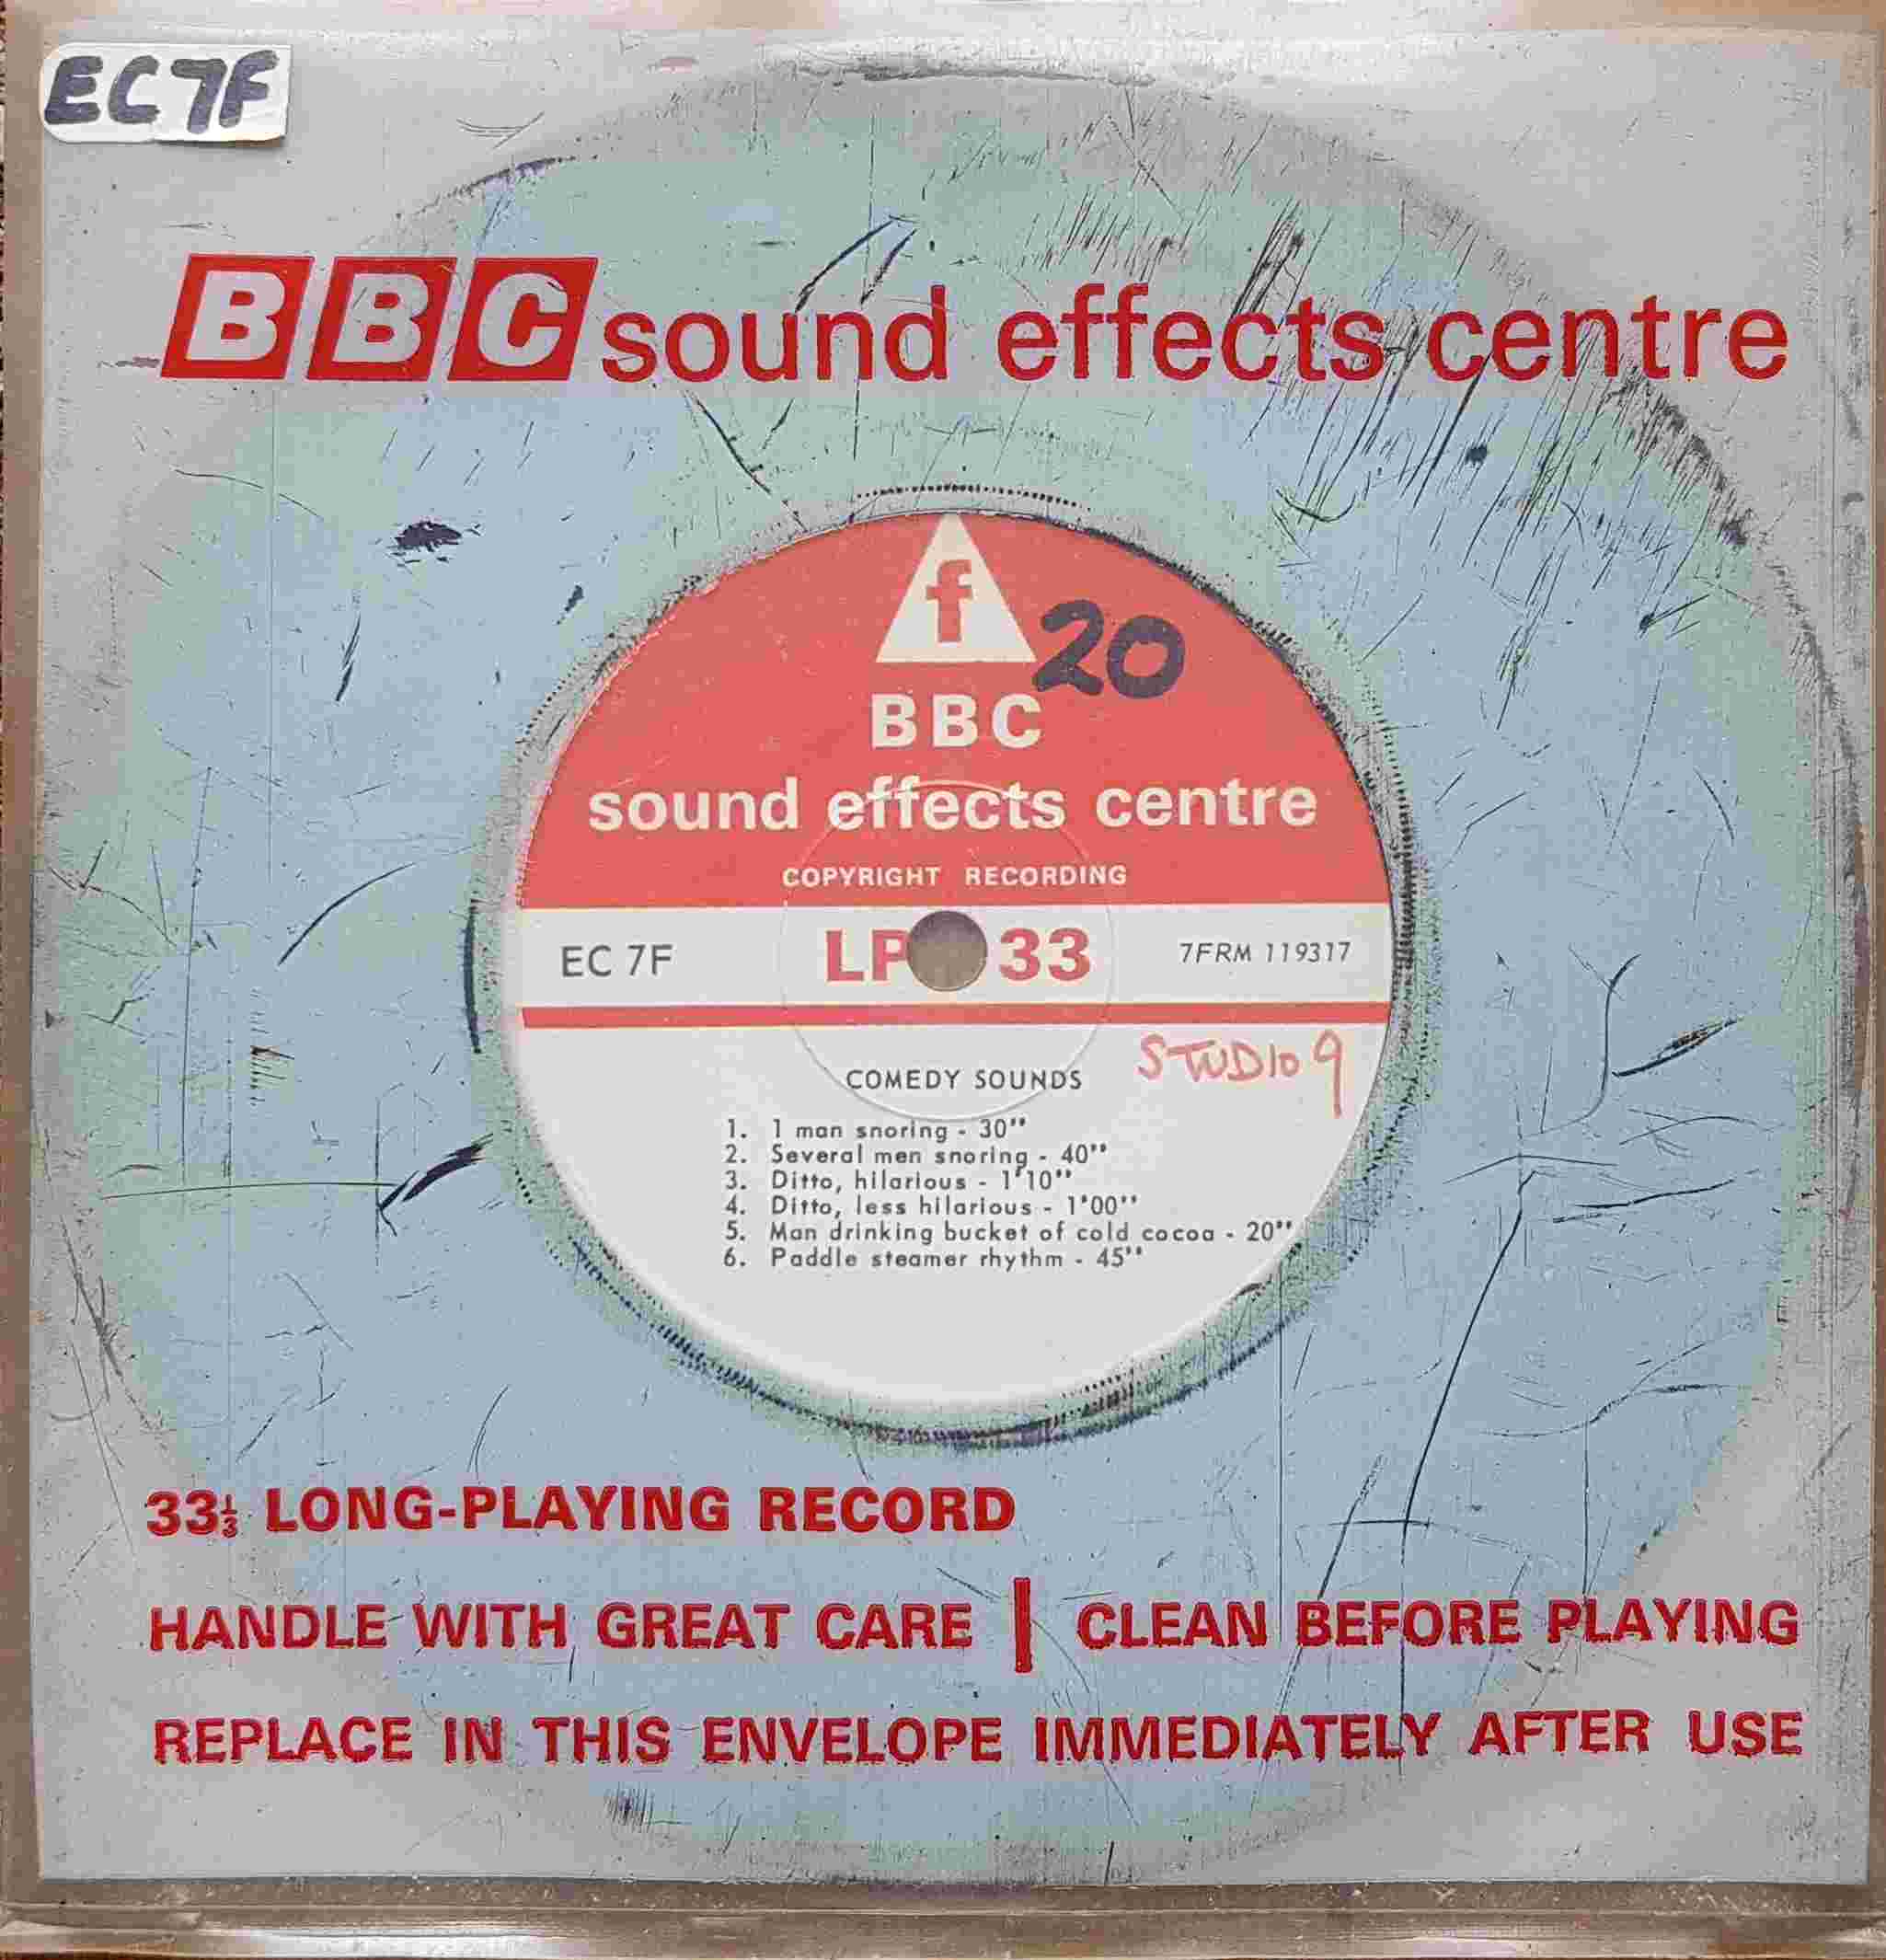 Picture of EC 7F Comedy sounds by artist Not registered from the BBC records and Tapes library